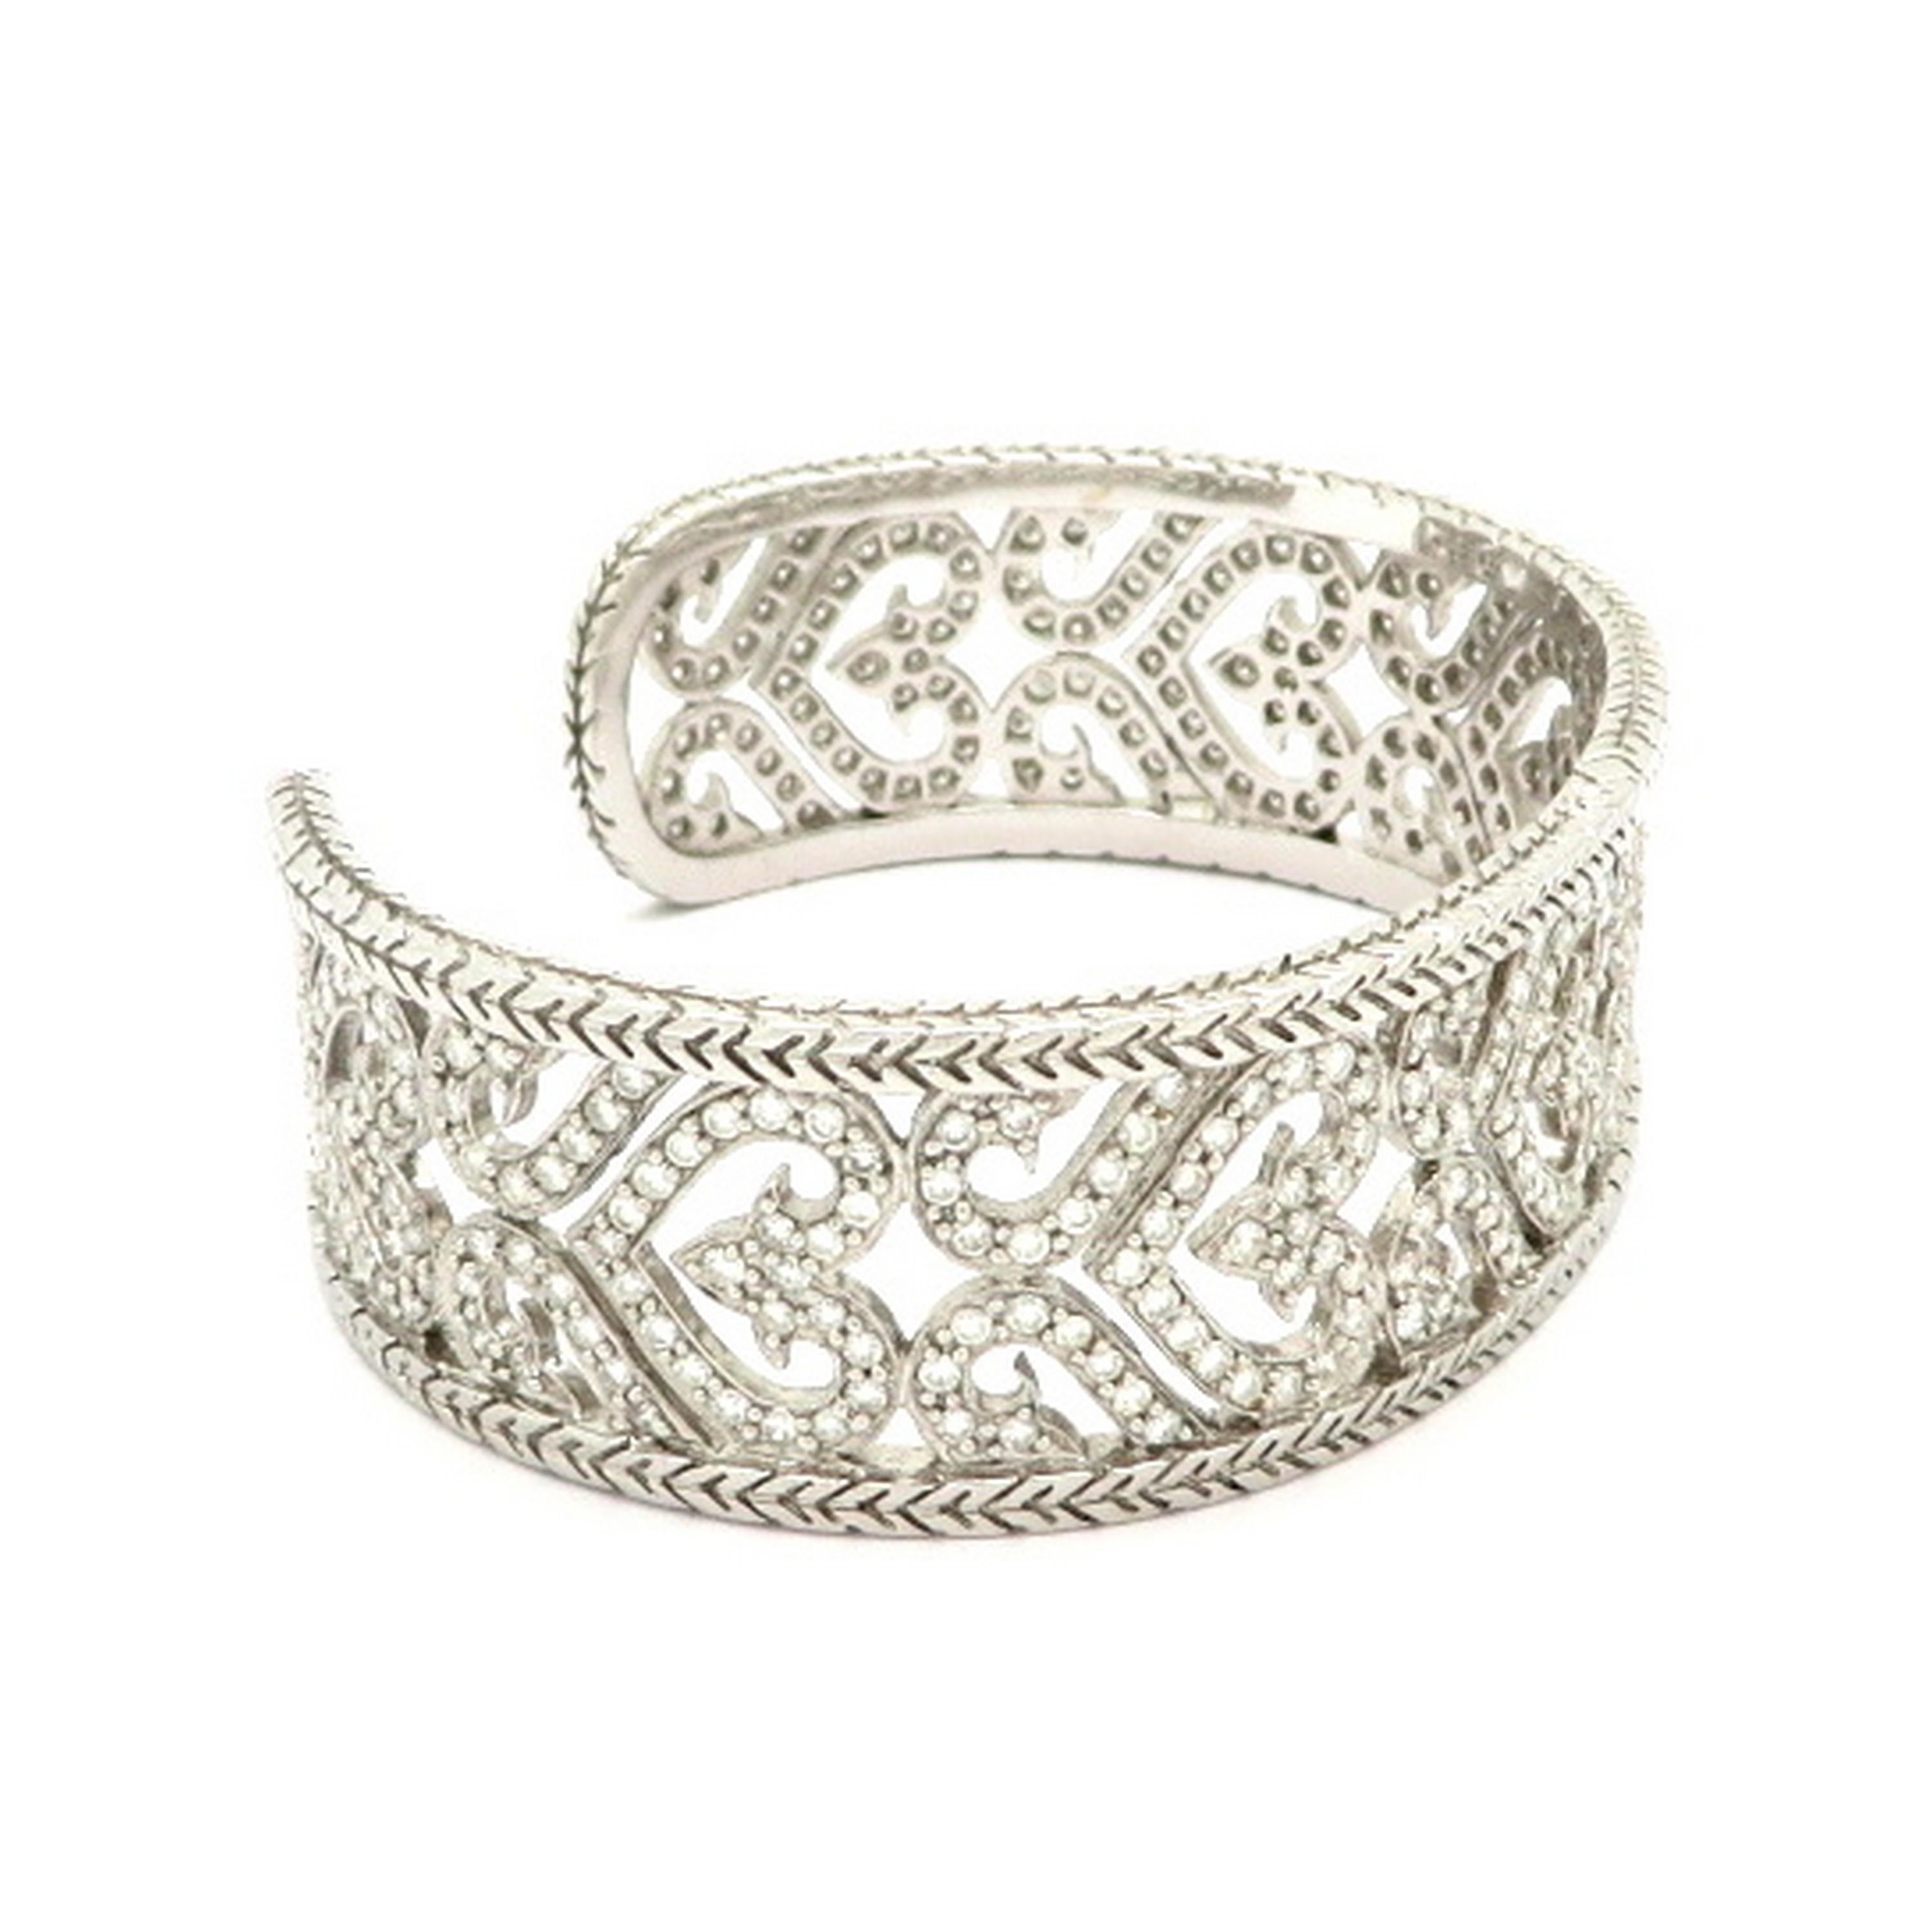 Estate 3.64 carat designer Chad Allison heart motif diamond cuff bangle bracelet. The bracelet is crafted out of 18K white gold. The inner dimensions are 53 x 43 mm. The bracelet has a heart motif with a leaf style engraved border. It features